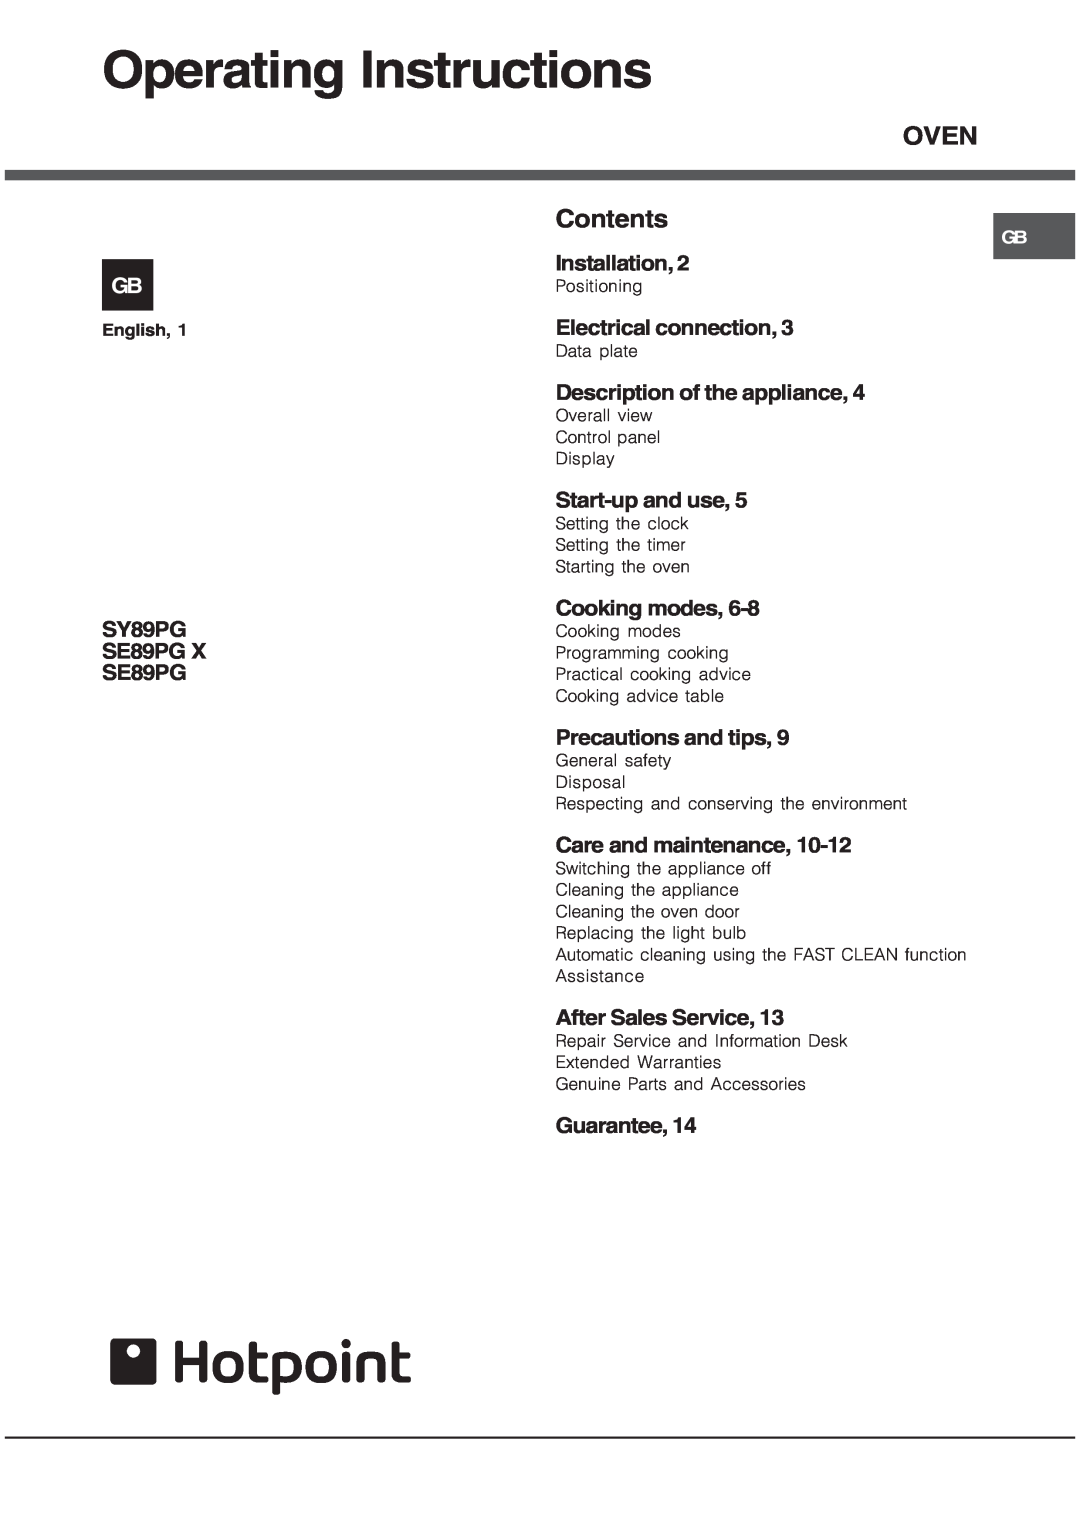 Hotpoint SE89PG X, SY89PG manual Operating Instructions, Oven, Contents 